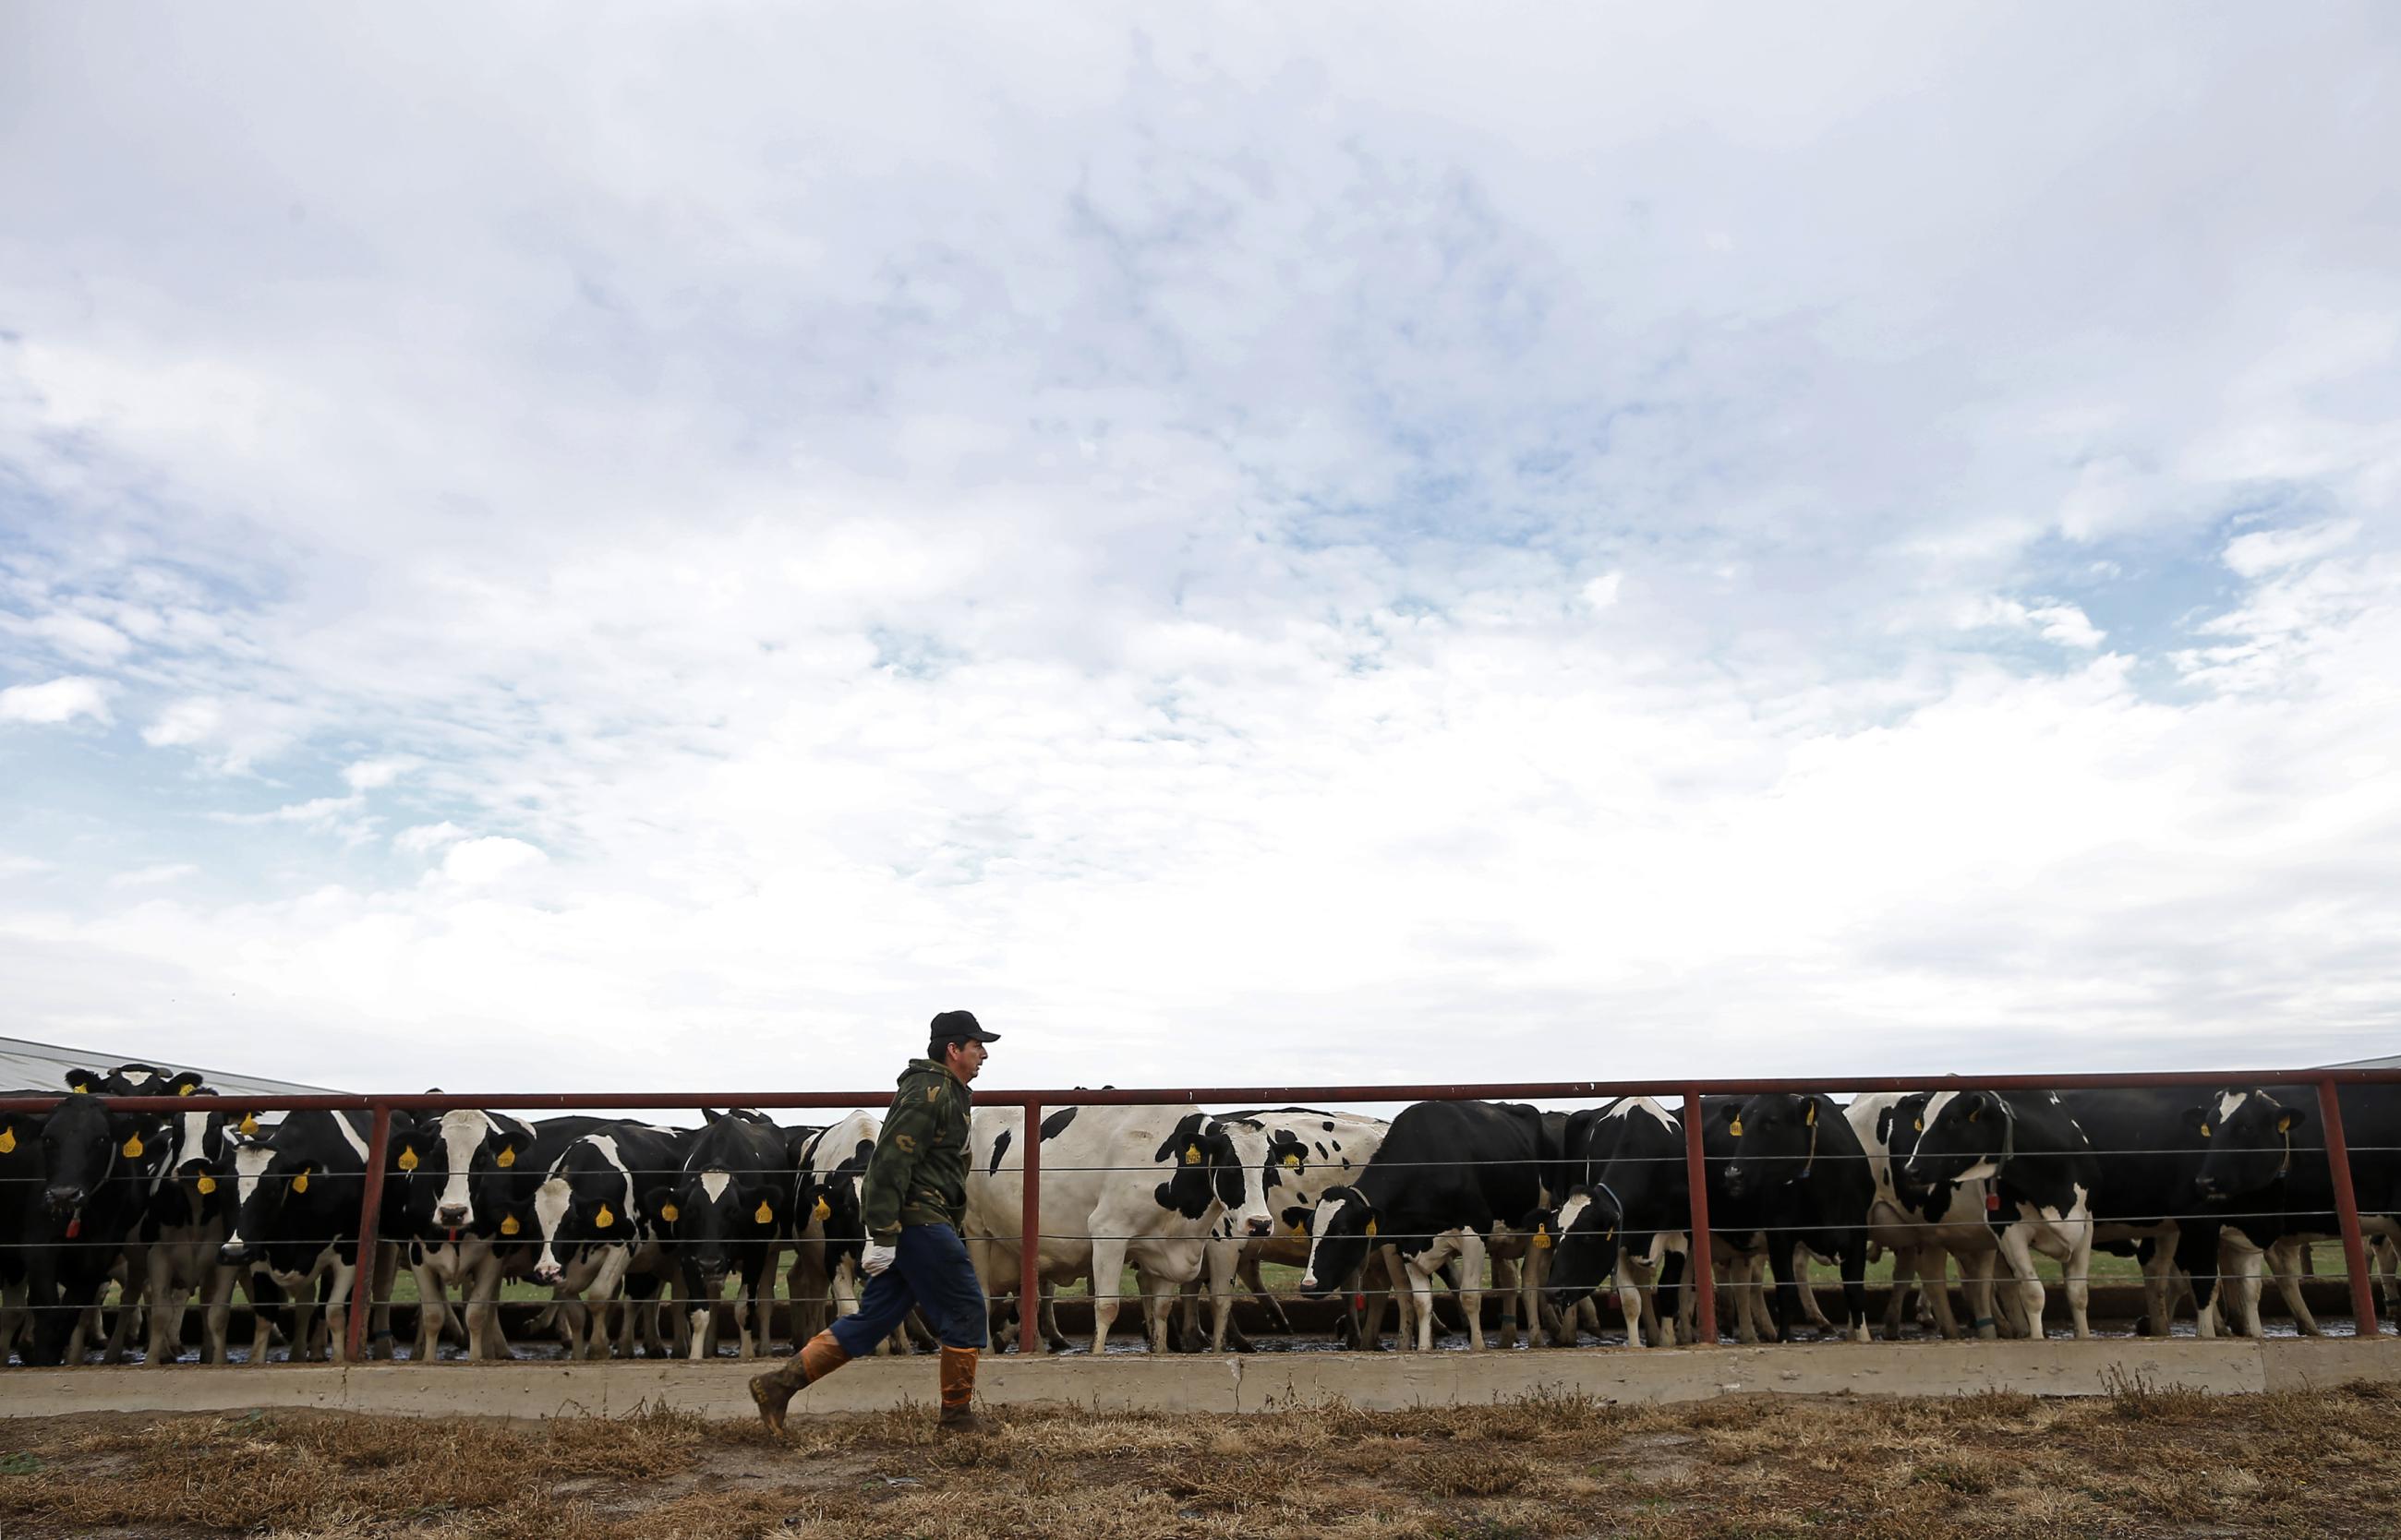 A worker ushers dairy cows from their free-stall barn to the milking parlor at Fair Oaks Farms.